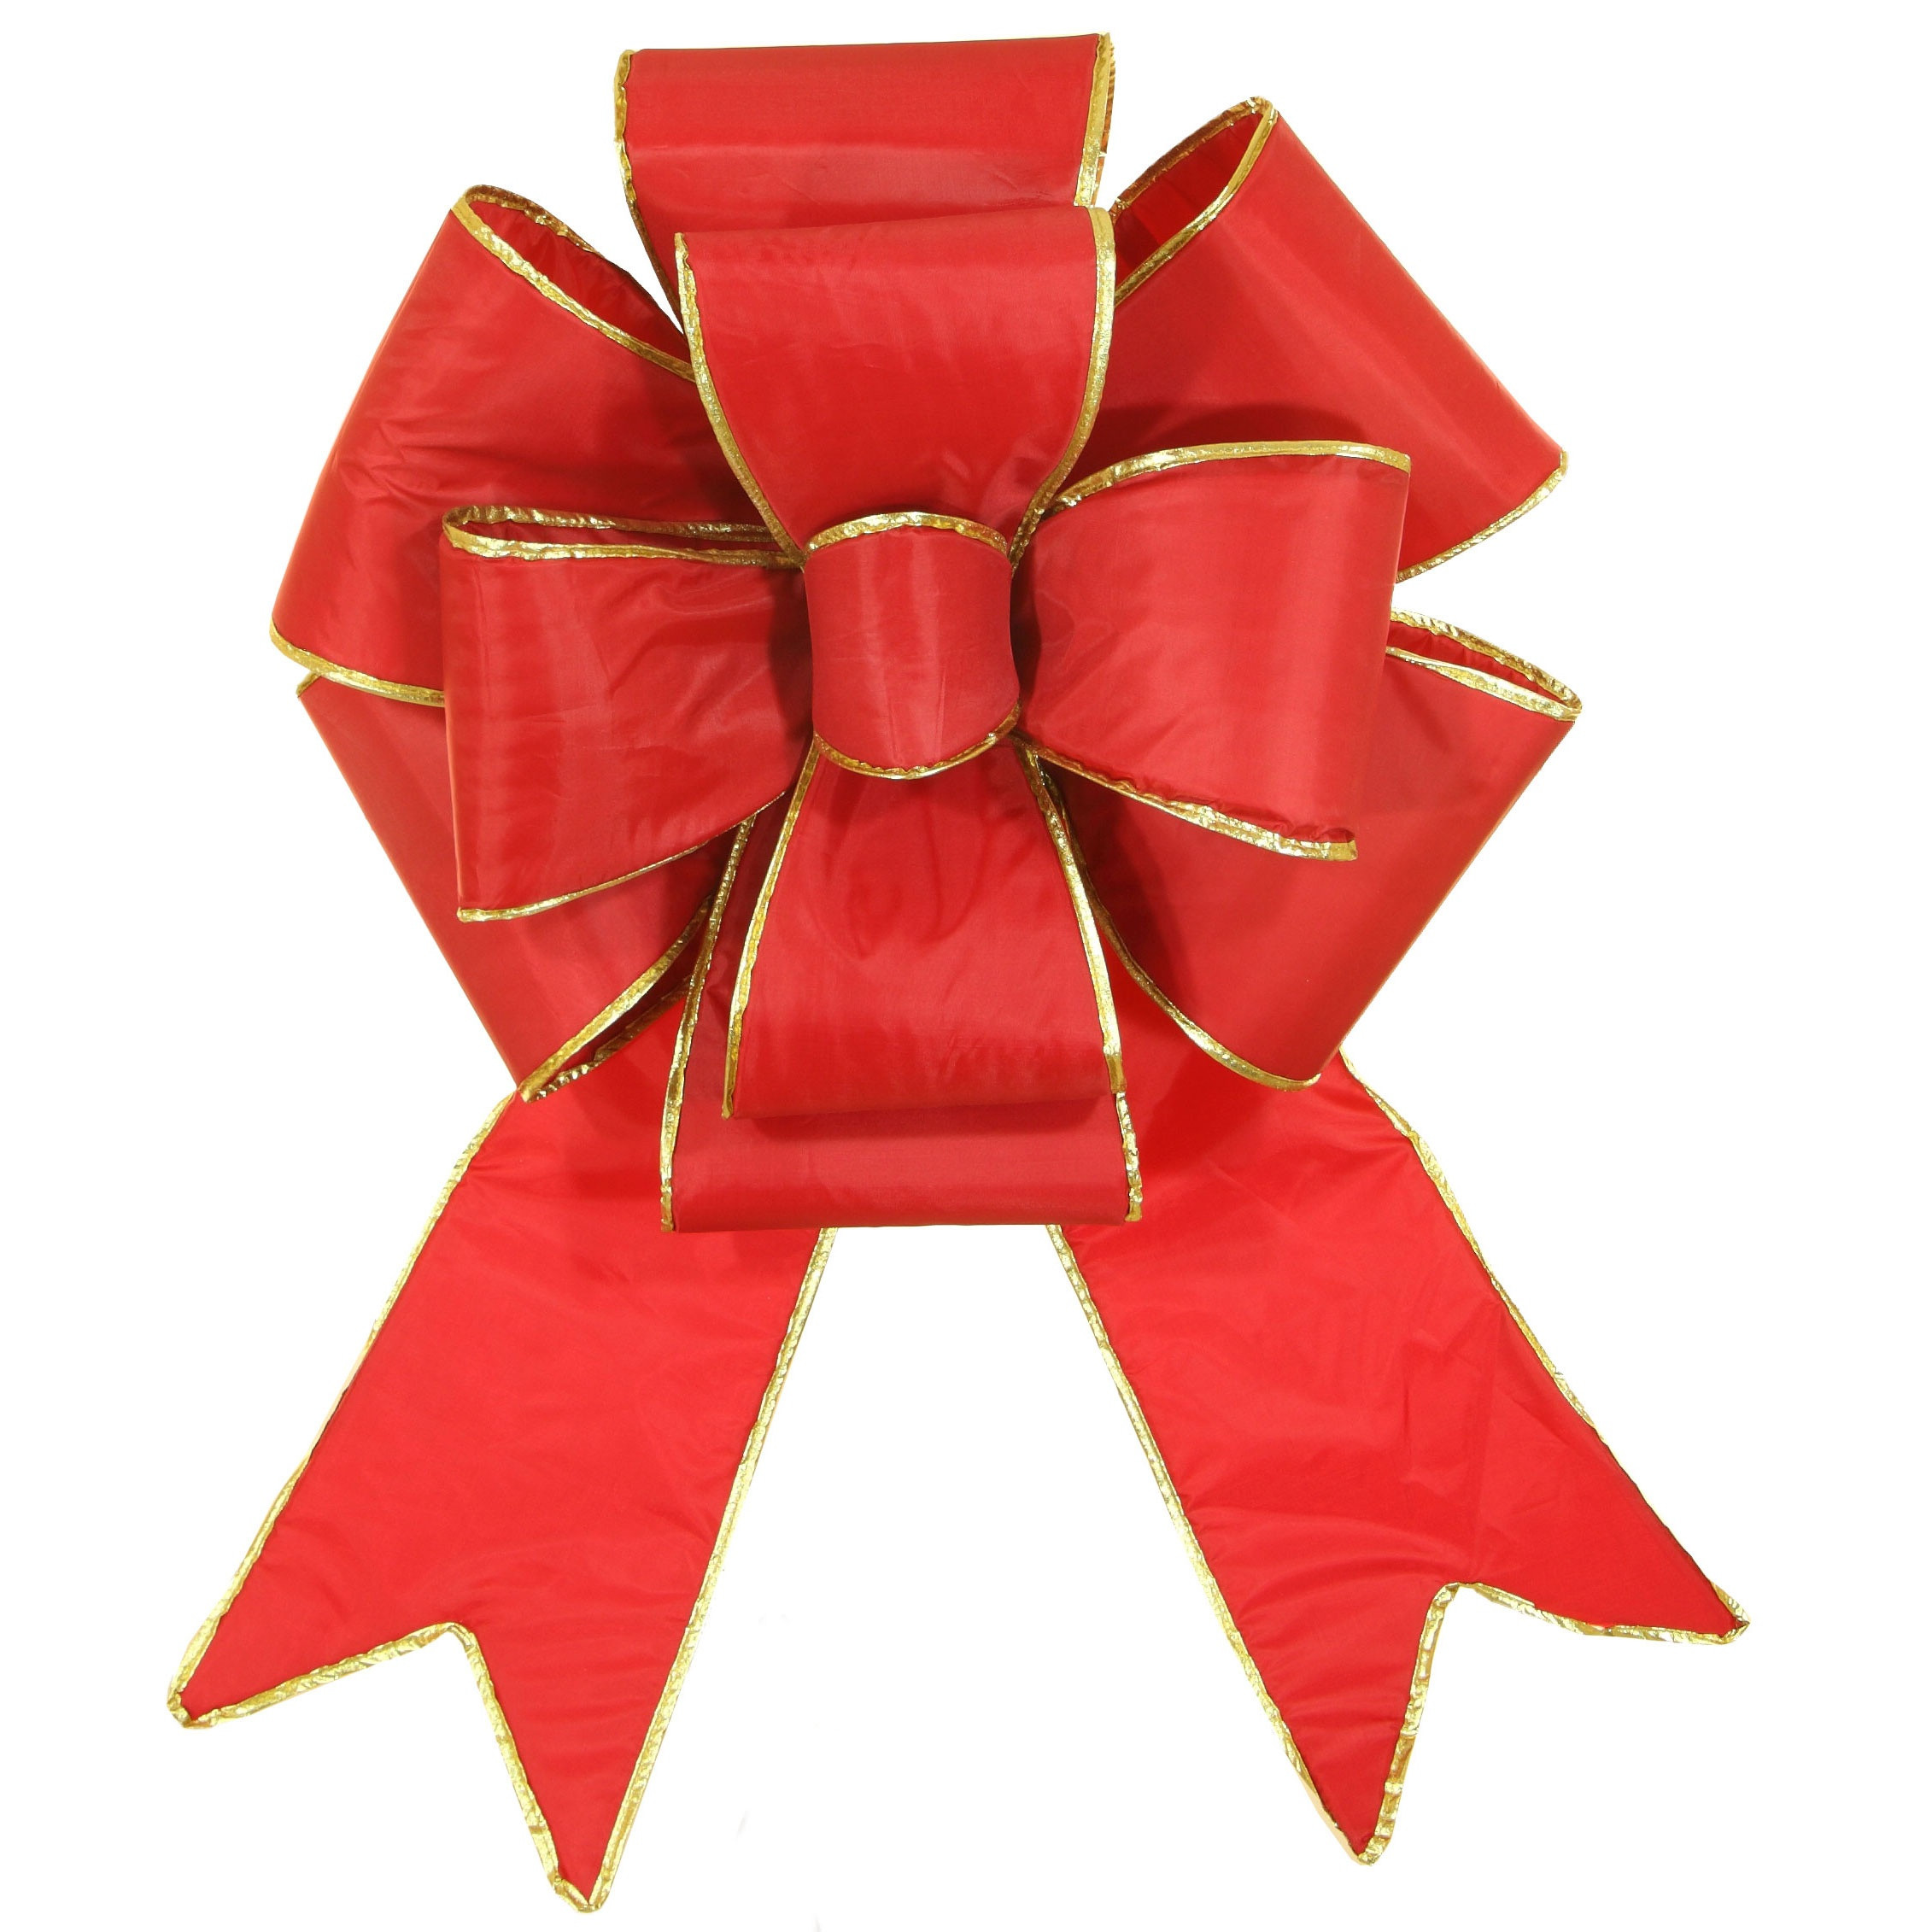 Large Outdoor Christmas Bows
 Outdoor Christmas Decorations